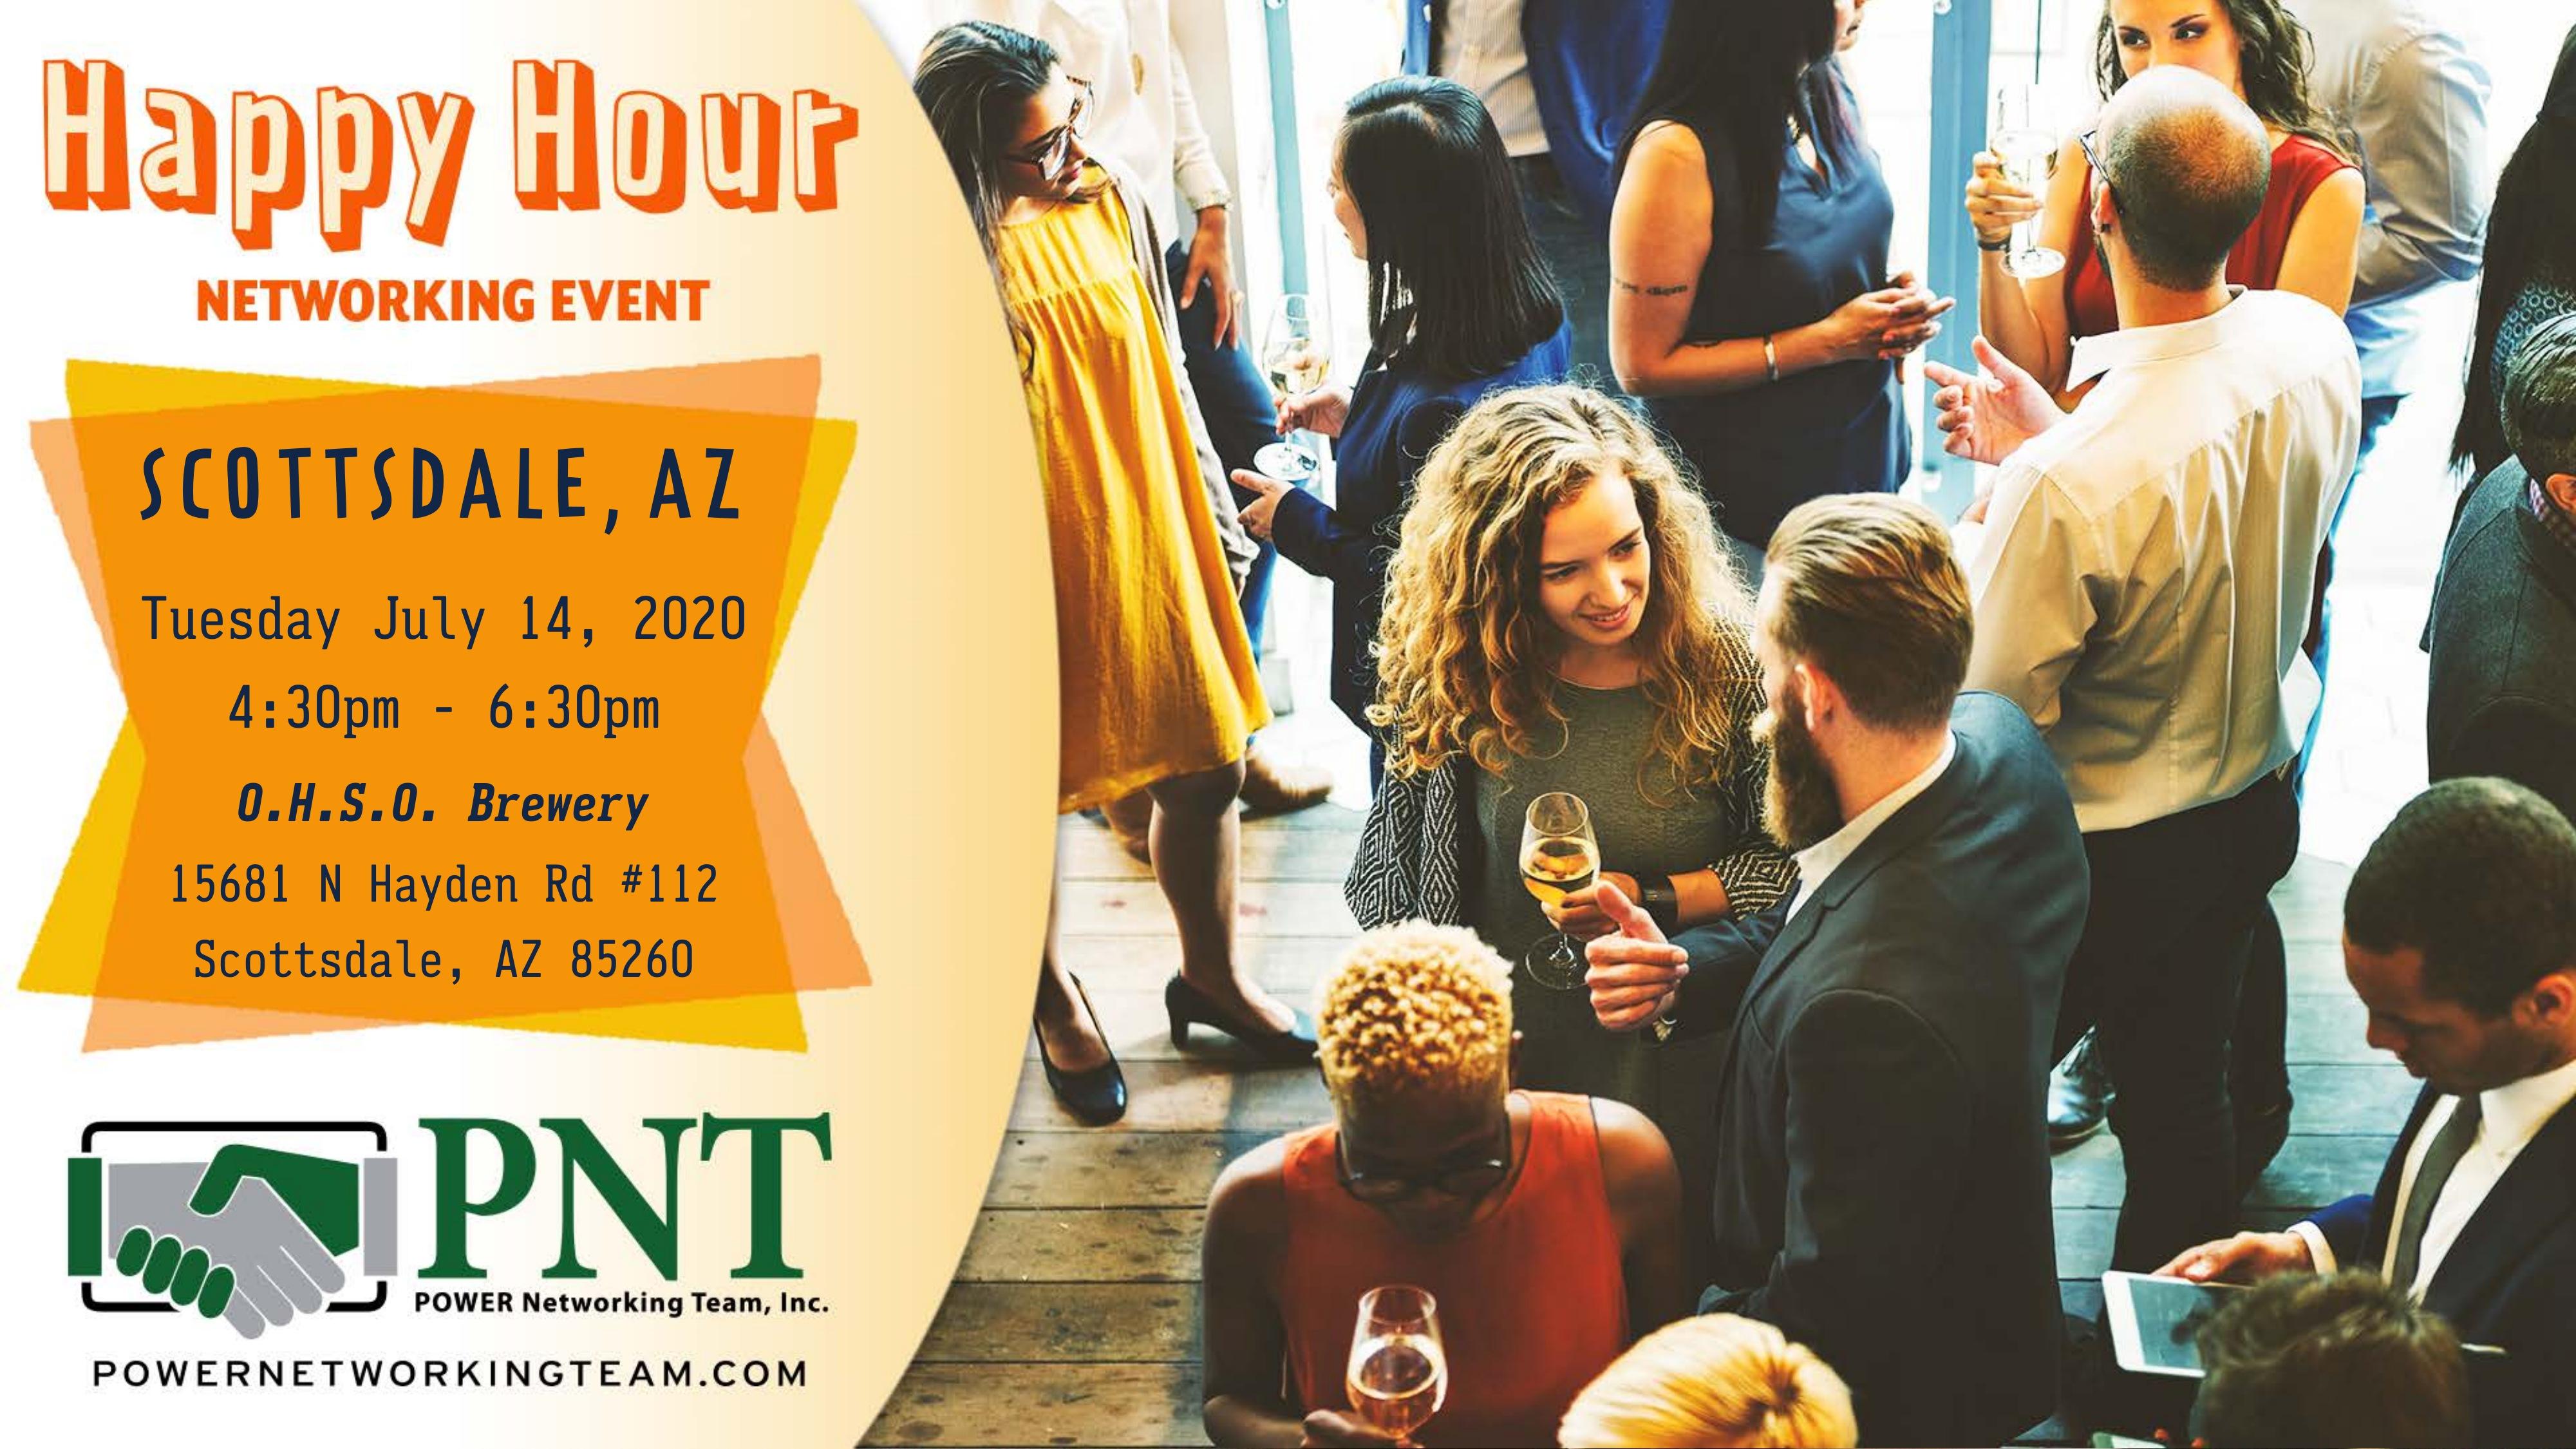 07/14/20 PNT North Scottsdale Happy Hour Networking Event